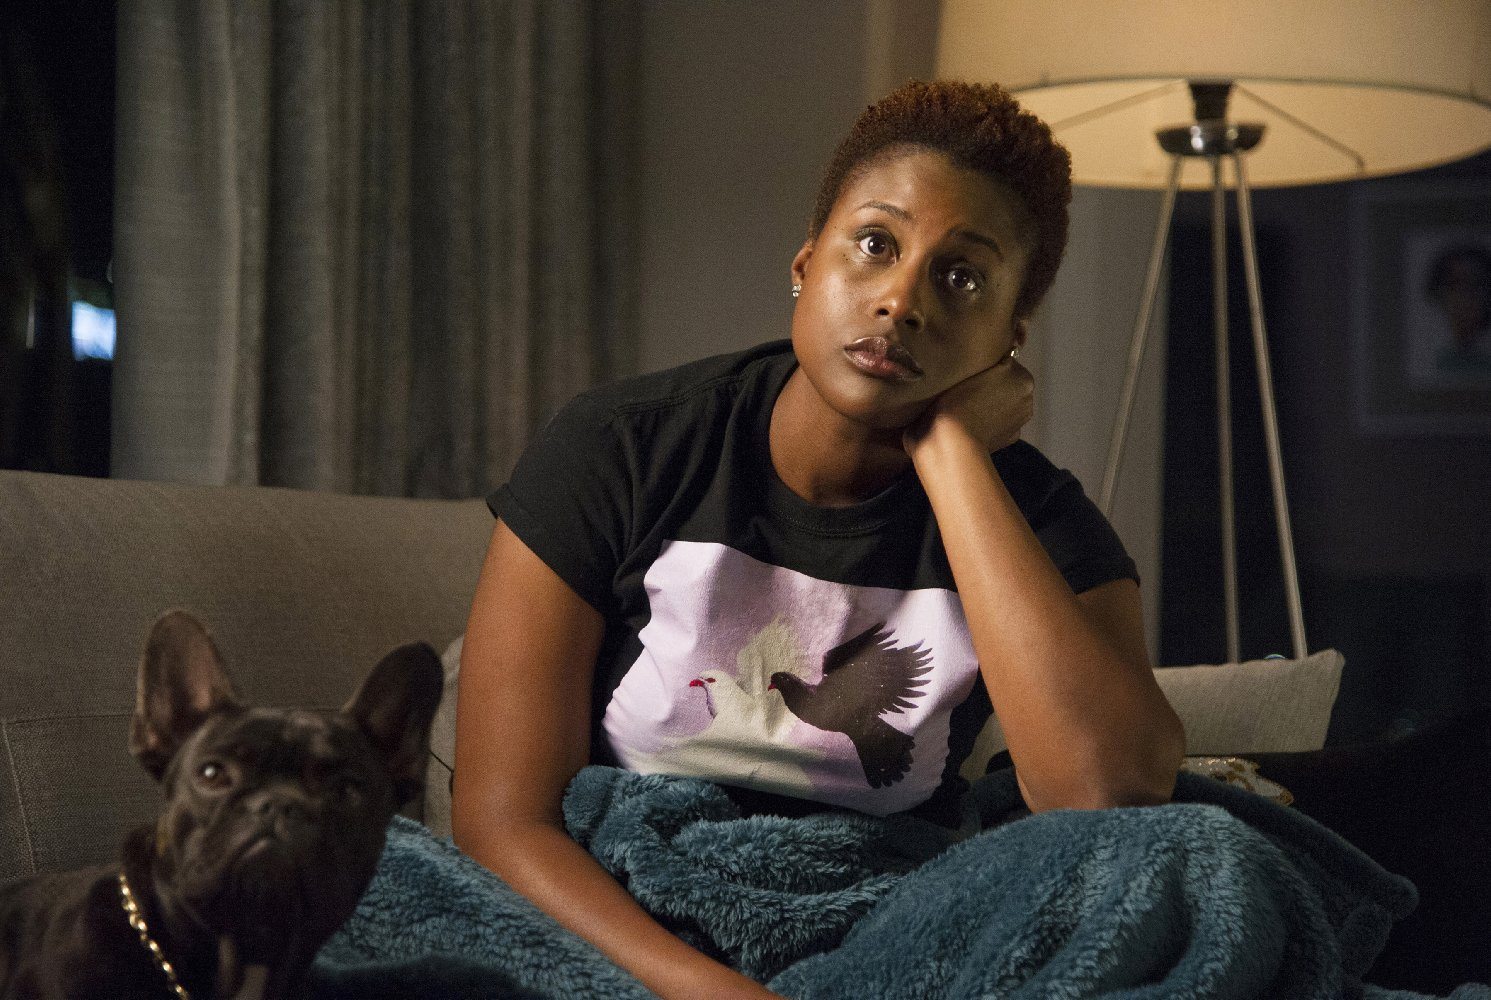 Issa Rae with her head resting on her hand sitting on a couch next to a French Bull Dog